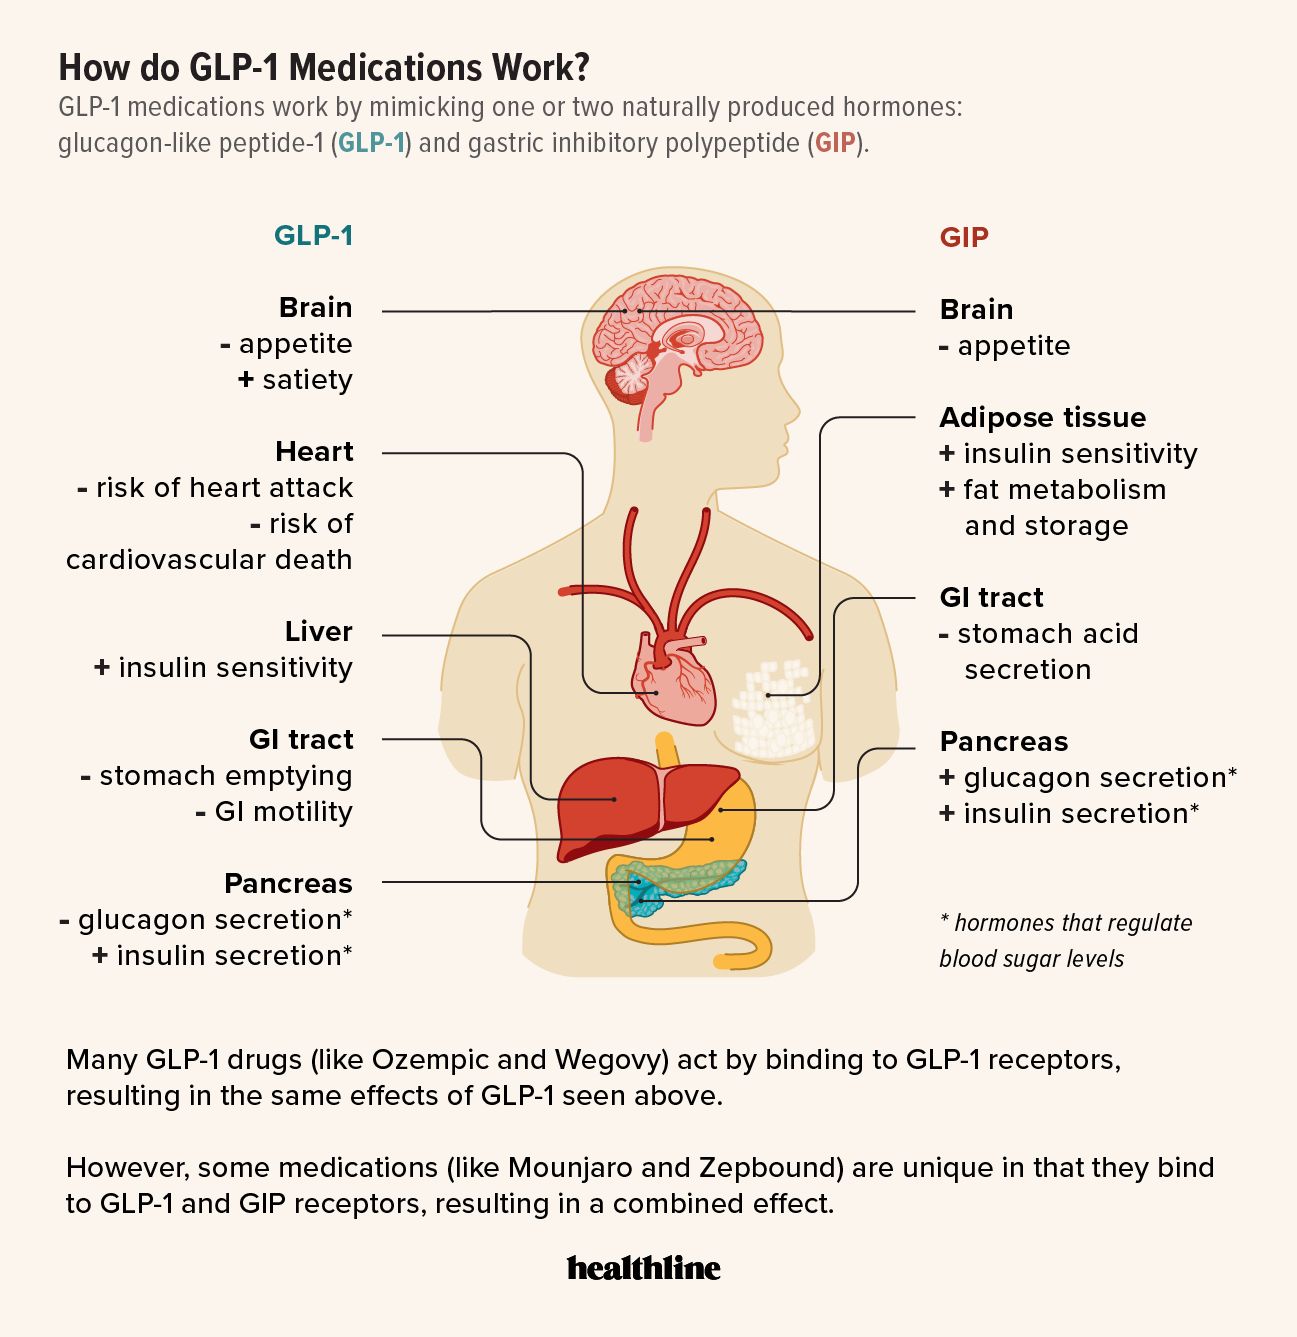 Infographic explaining how GLP-1 and GIP/GLP-1 agonists work